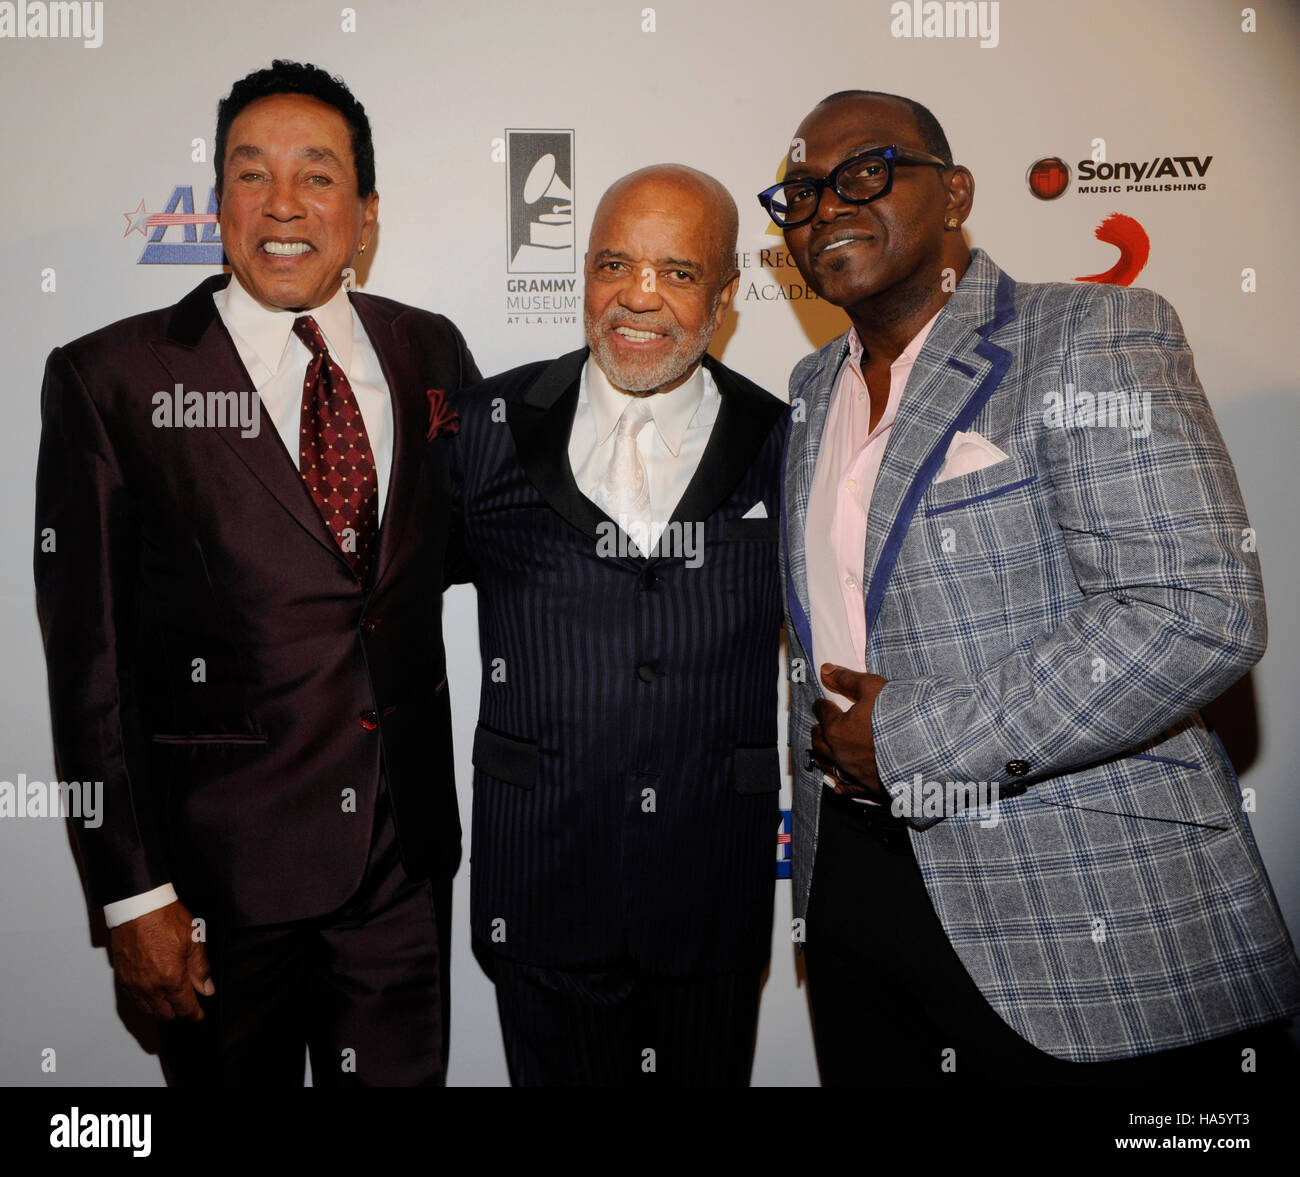 (L-R) GRAMMY winner Smokey Robinson, Motown founder Berry Gordy and Randy Jackson honored at the first-ever Architects of Sound Awards at the GRAMMY Museum on November 11, 2013 in Los Angeles, California. Stock Photo